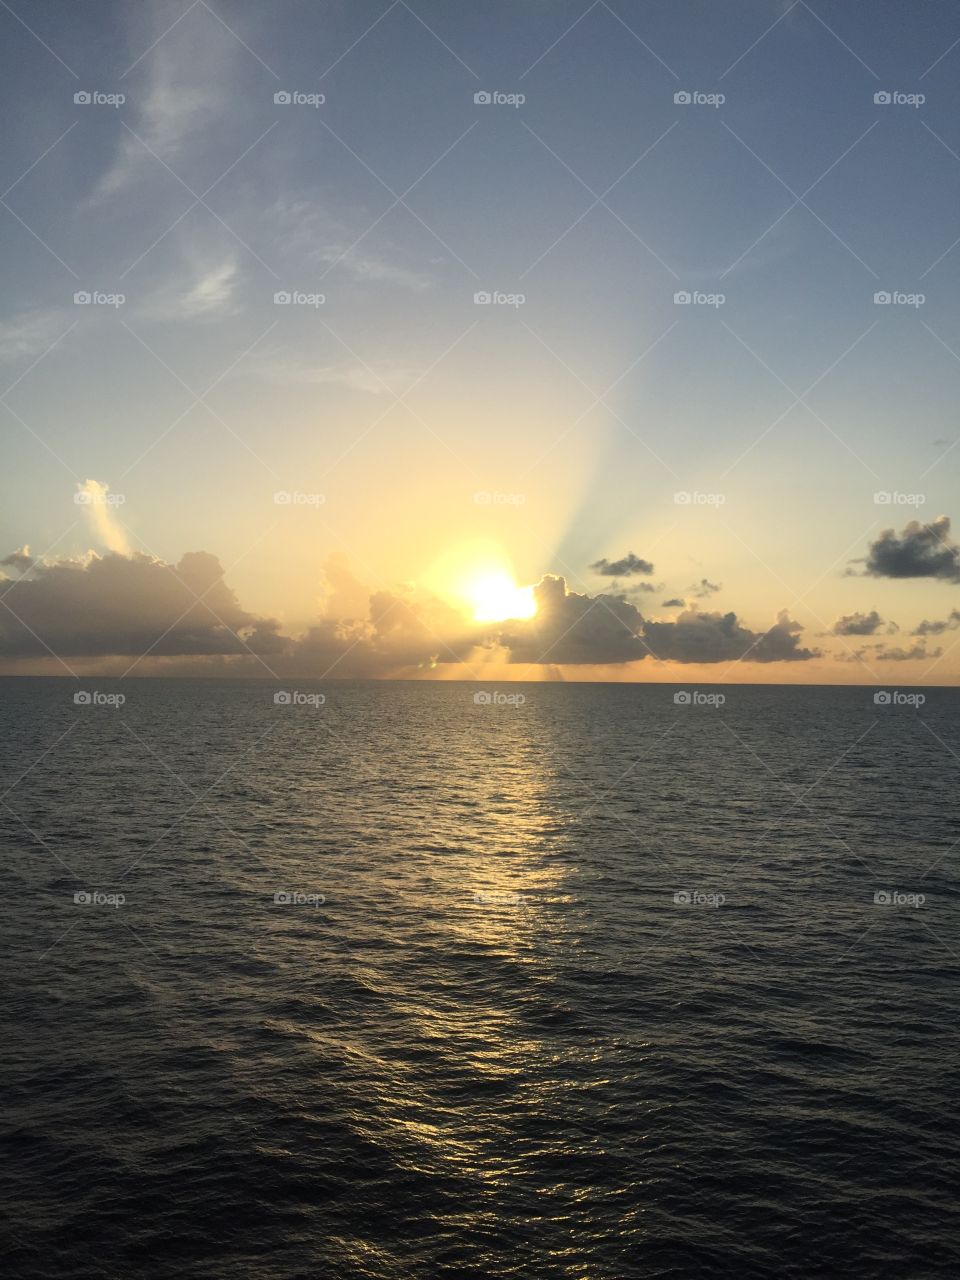 Gulf of Mexico sunset 100 miles offshore 